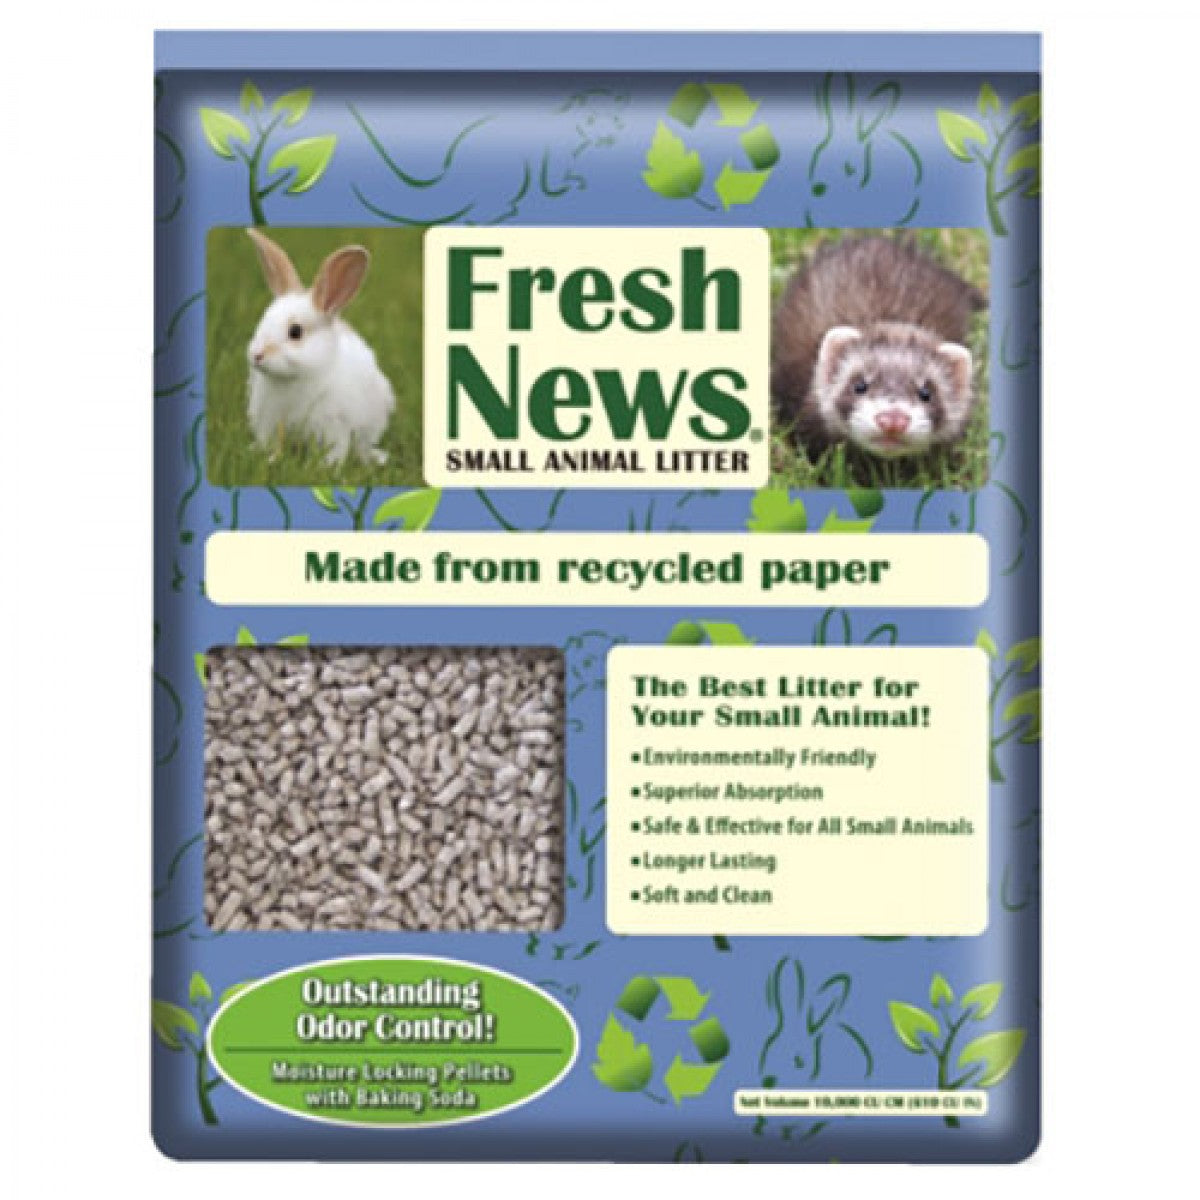 Fresh News Recycled Paper Small Animal Litter, 4.46-lb (Size: 4.46-lb)